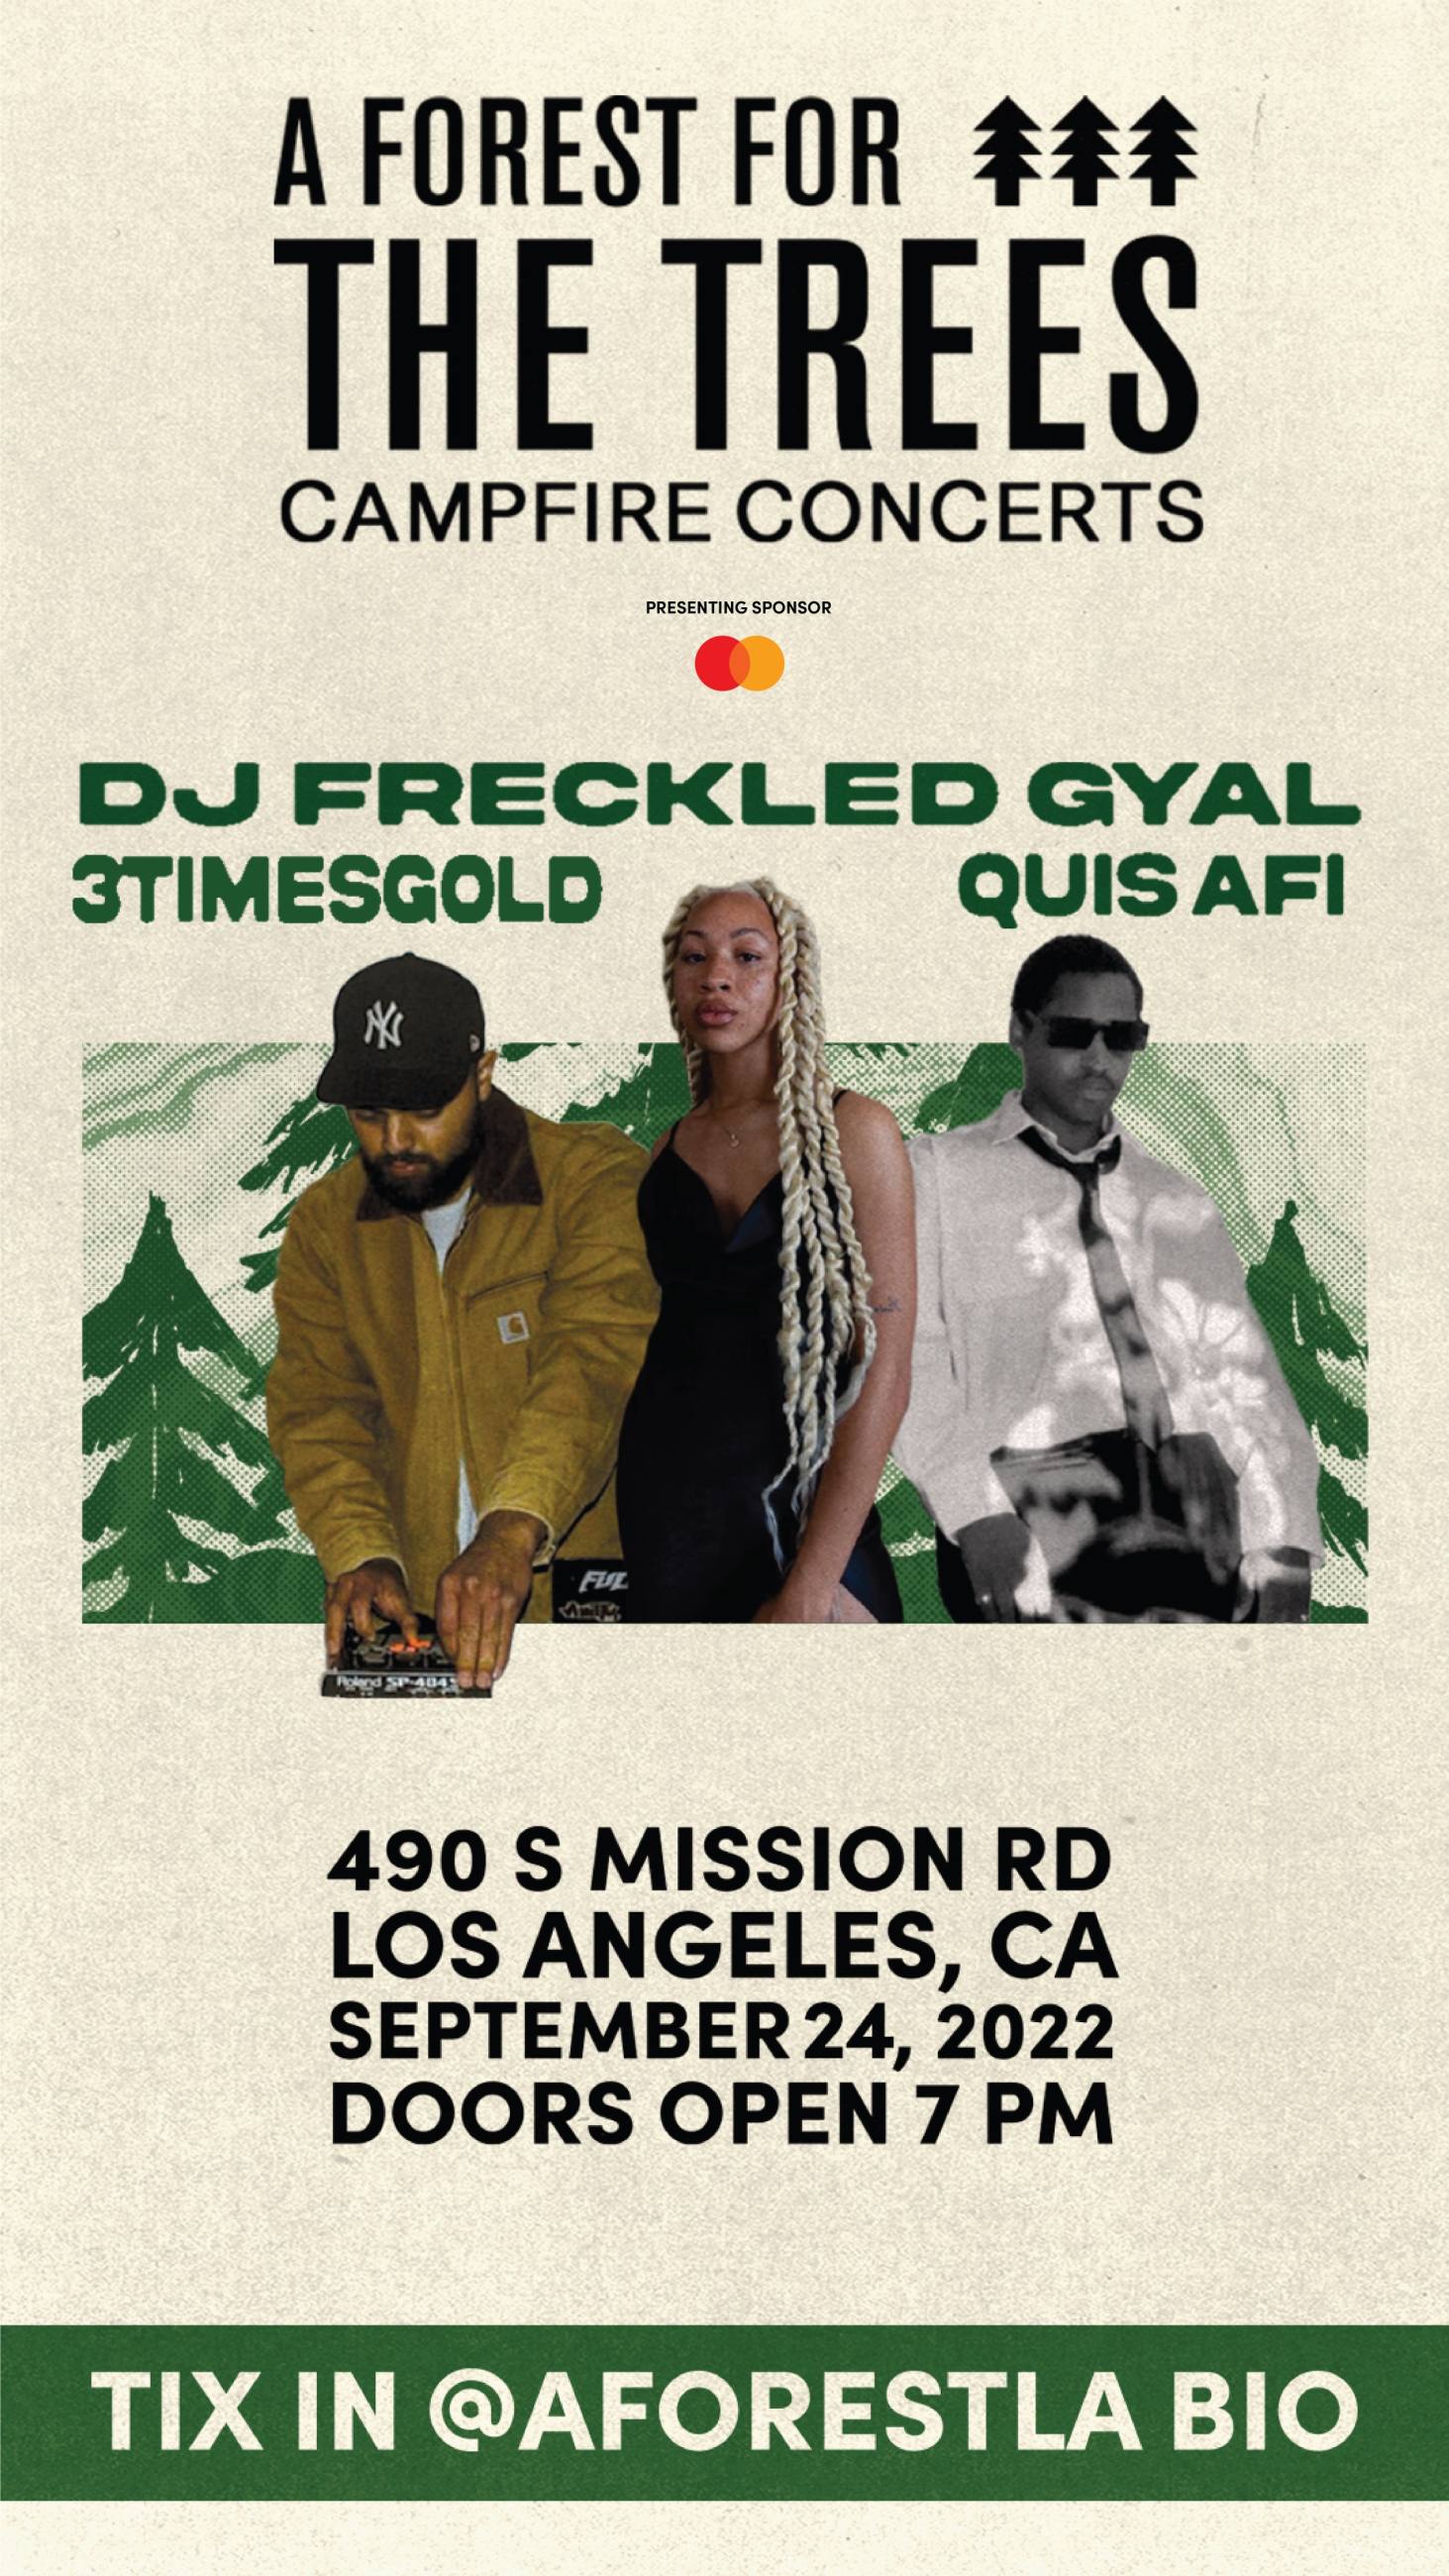 "Join us at the Campfire Concert series on Saturday, September 24th in The Forest with Djs Quis Afi, 3TimesGold, and Freckled Gyal.